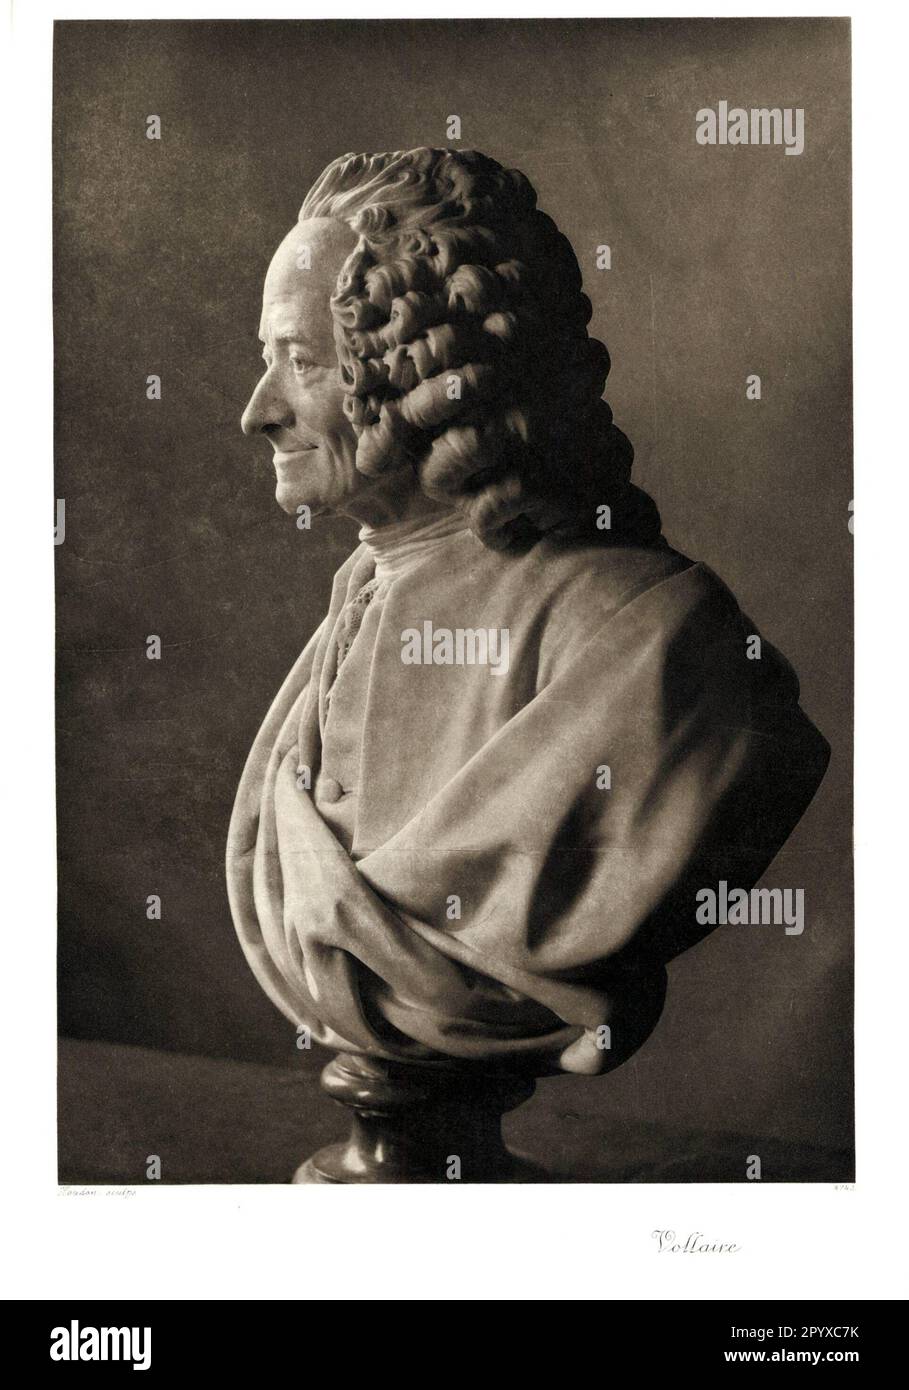 Voltaire (eig. Francois-Marie Arouet, 1694-1778), French writer and philosopher. Bust of Jean-Antoine Houdon. Photograph. Photo: Heliogravure, Corpus Imaginum, Hanfstaengl Collection. [automated translation] Stock Photo